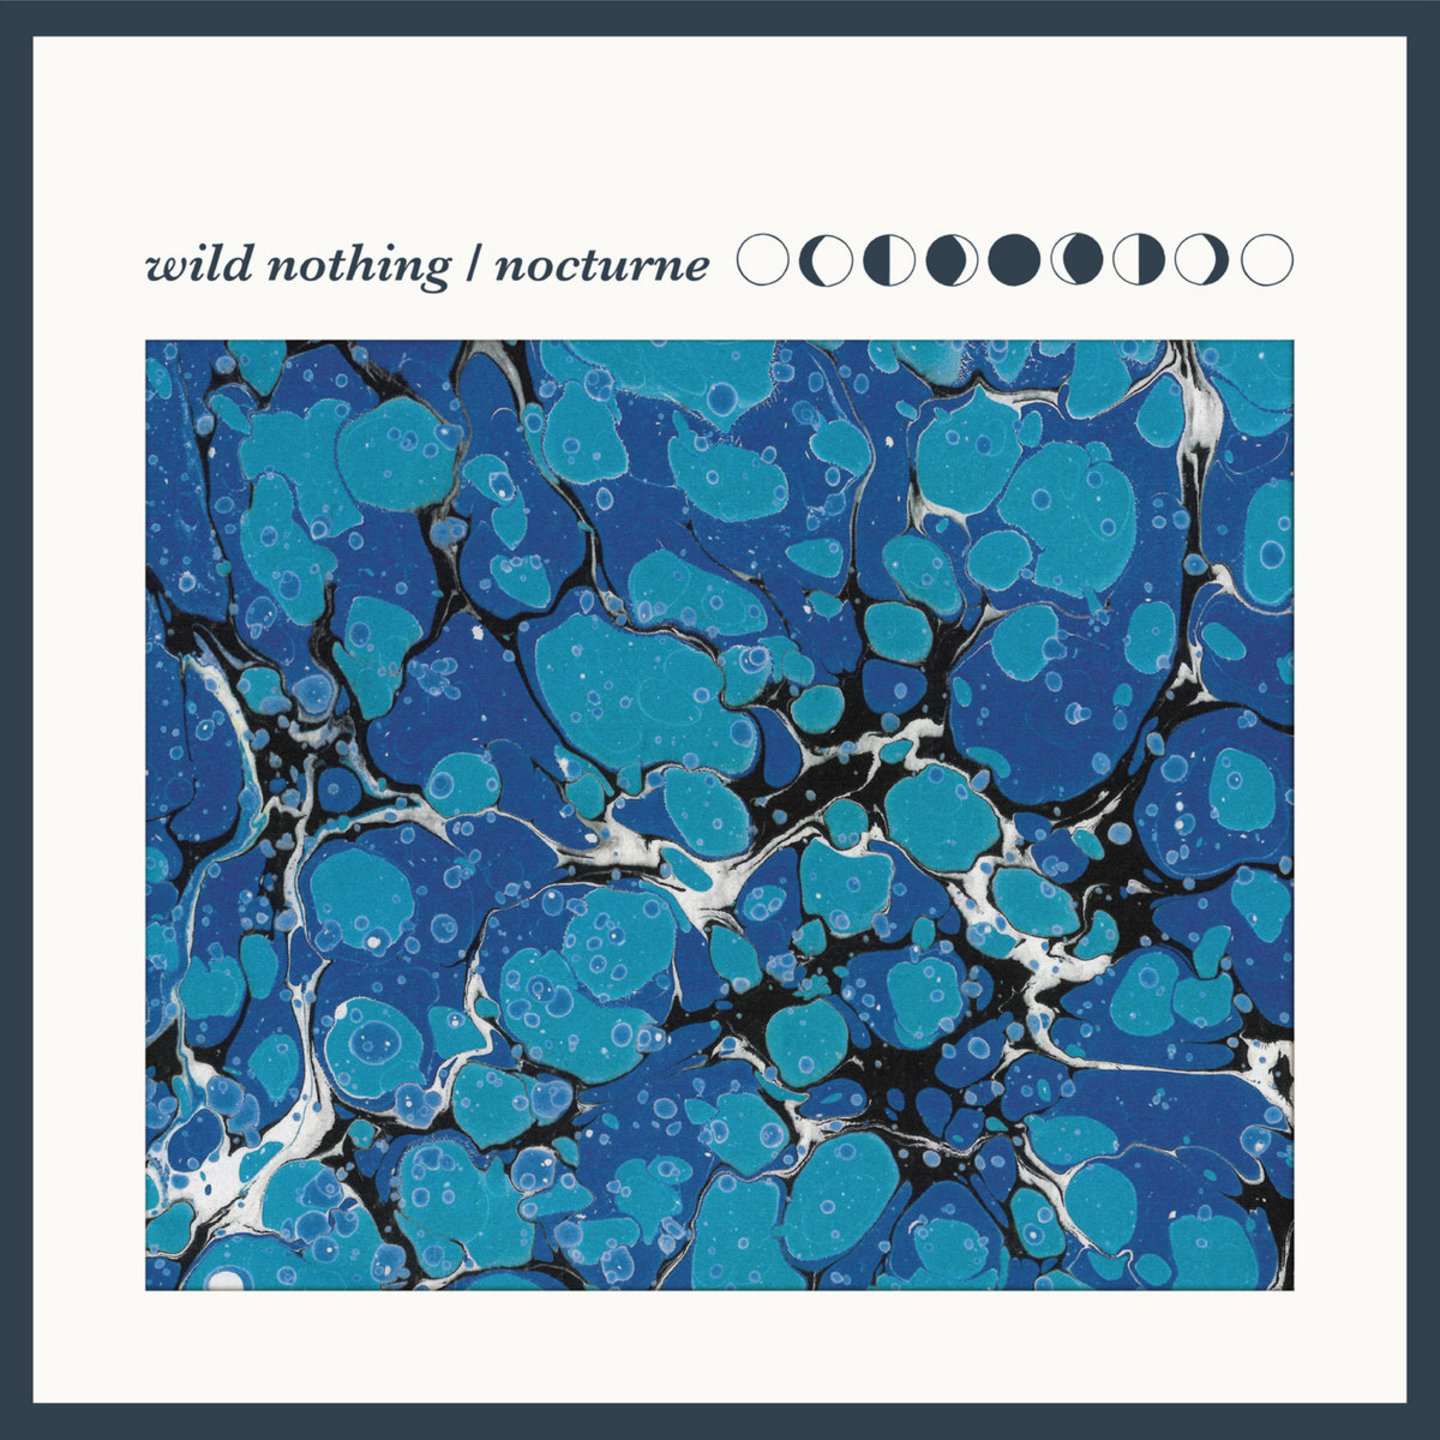 WILD NOTHING - Nocturne LP (10th Anniversary Edition Blue Marble vinyl)